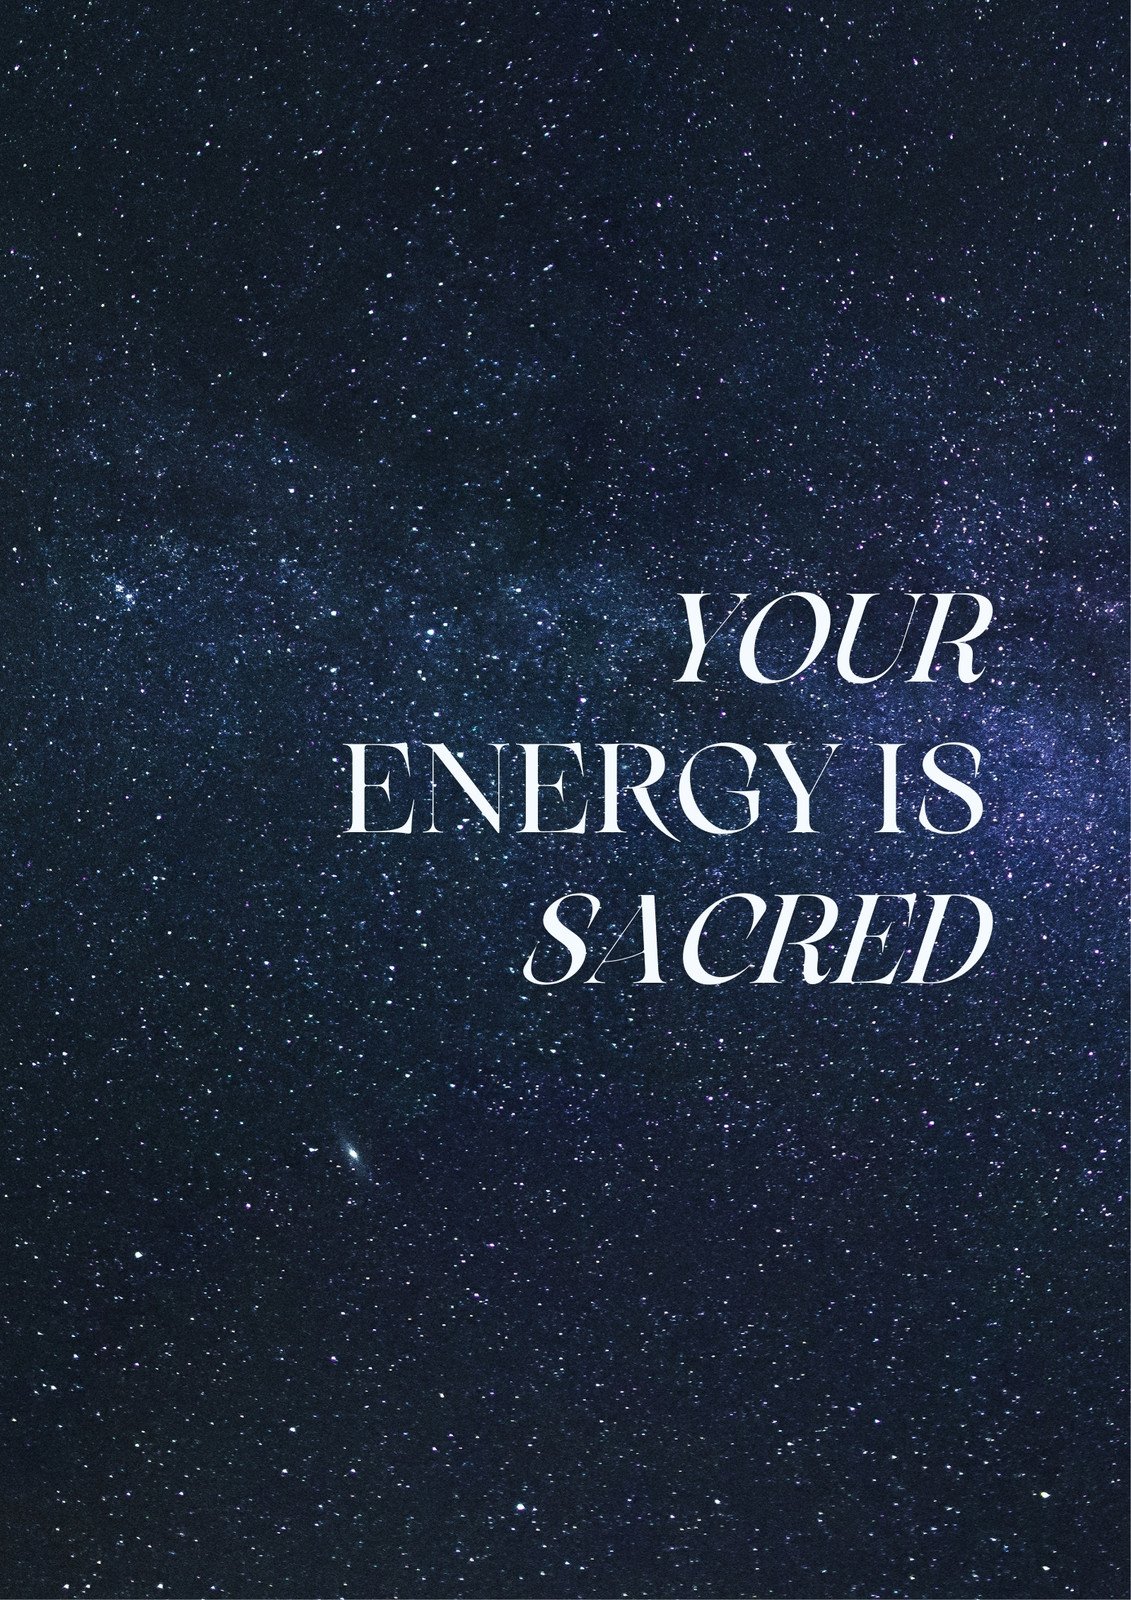 https://marketplace.canva.com/EAExCHtOmDk/1/0/1131w/canva-trendy-poster-with-quote.-your-energy-is-sacred.-Az8LBO_V6lo.jpg